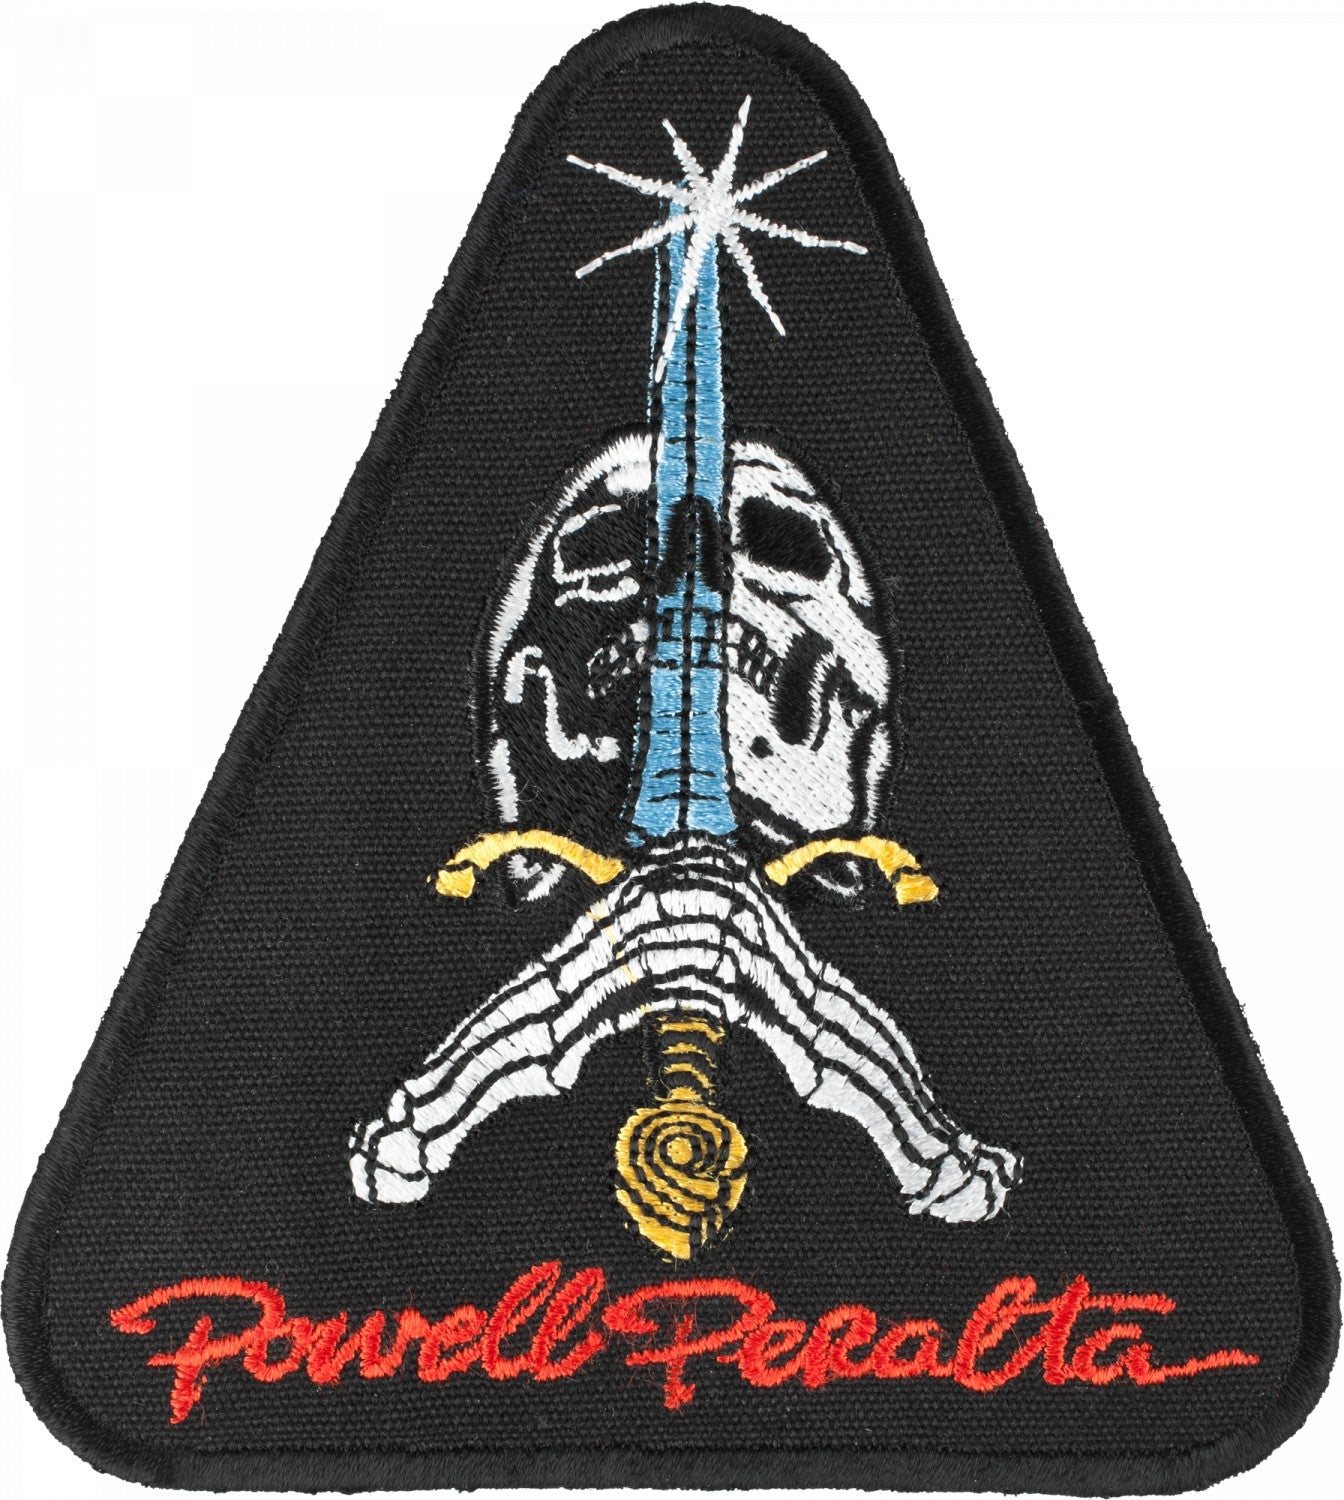 Powell Peralta Skull and Sword Patch, 3.5 Inch